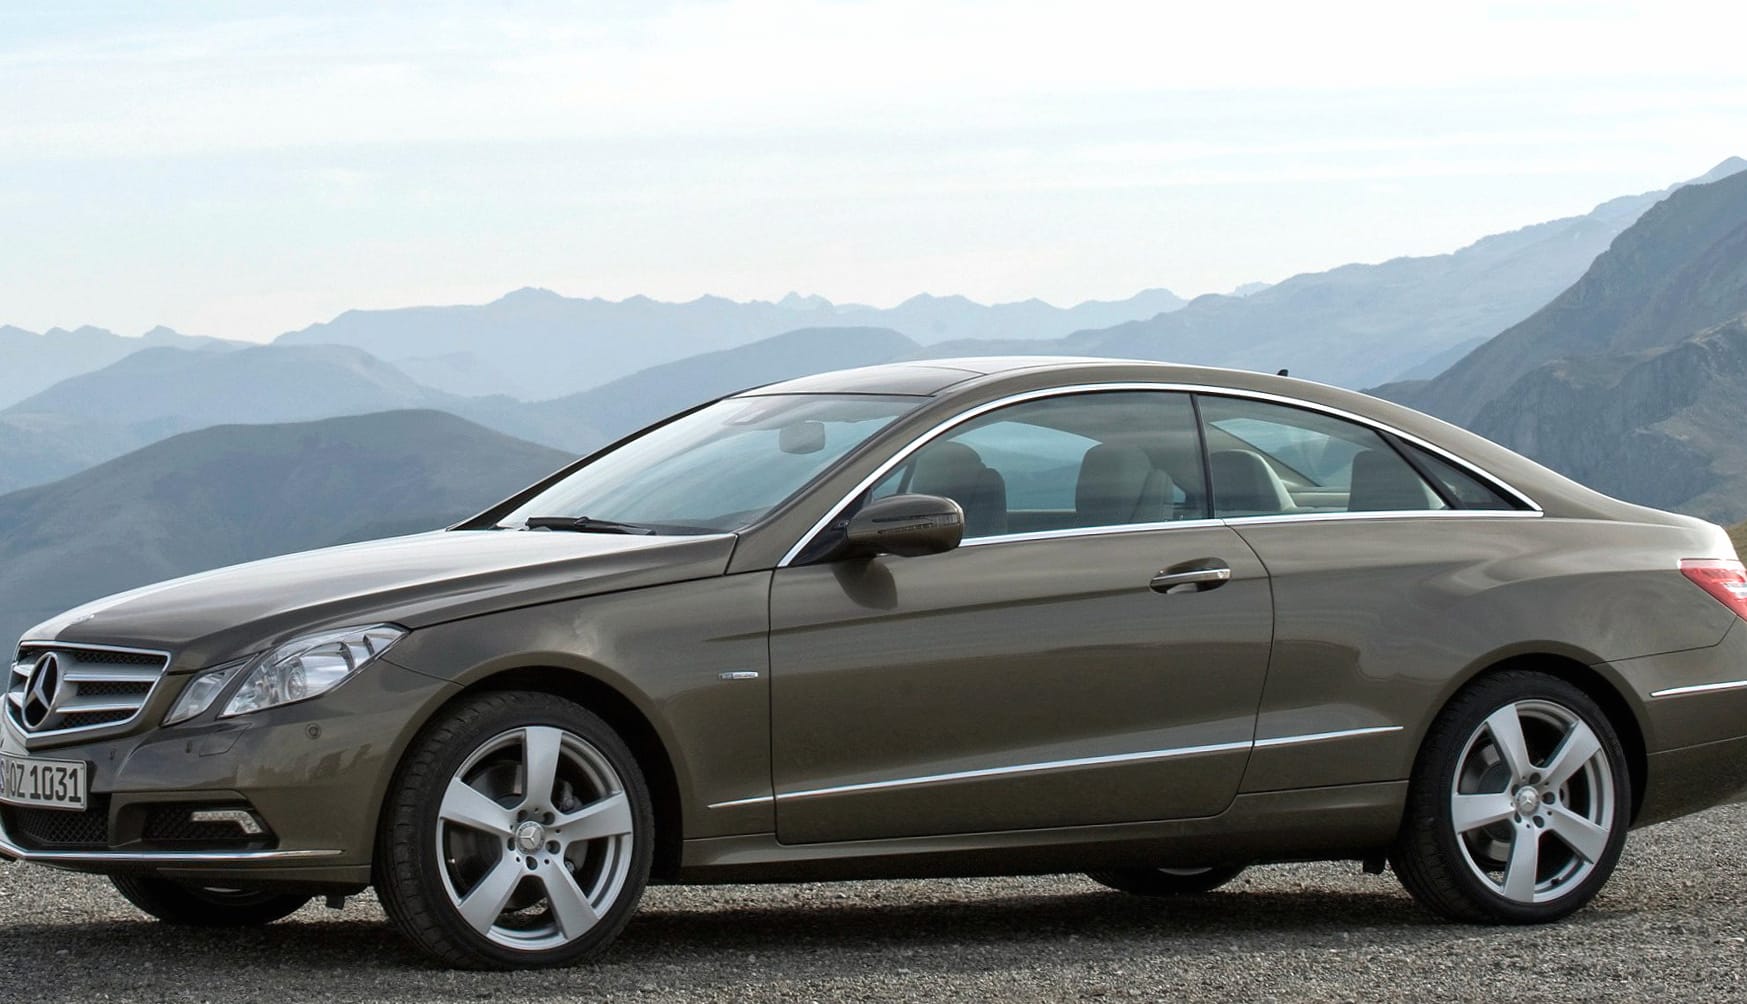 Mercedes-Benz E 350 CDI Coupe wallpapers HD quality